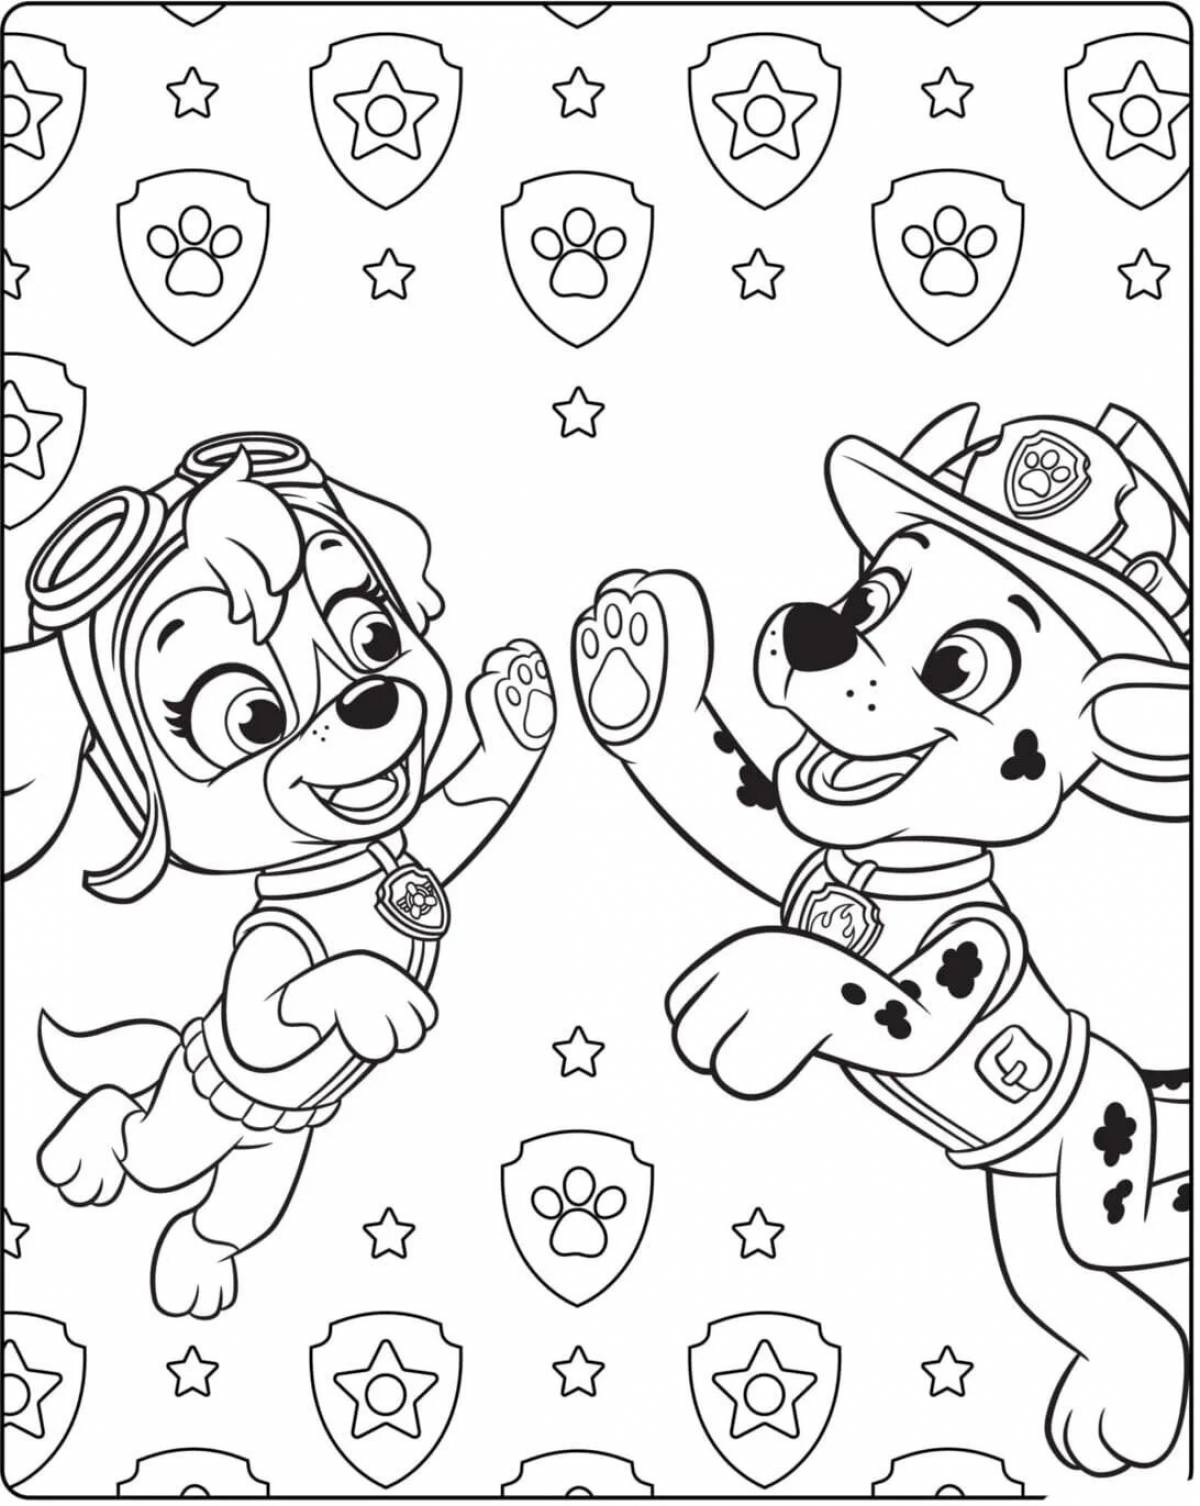 Marshal inspirational coloring book for kids